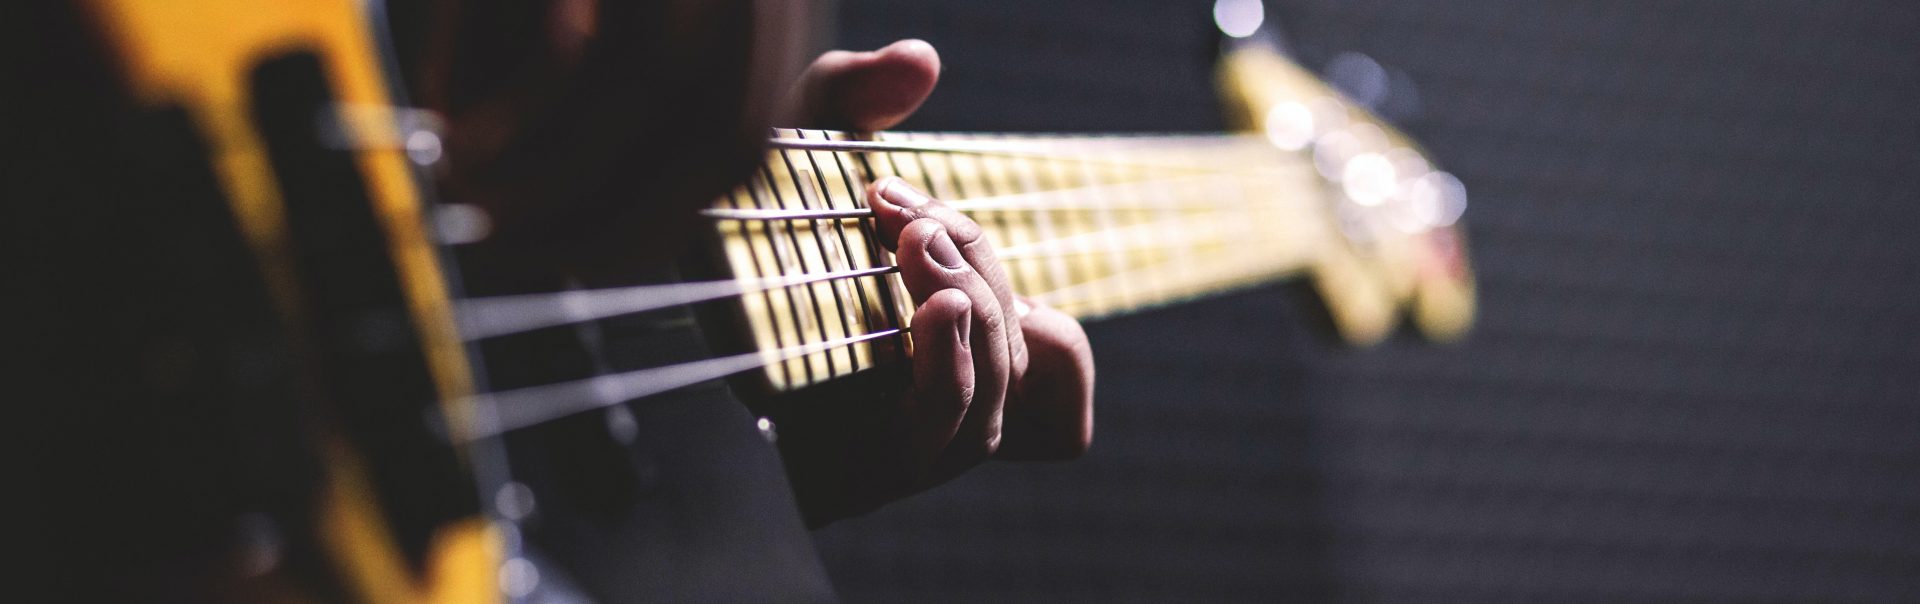 A selective focus image of a person practicing on a bass guitar.